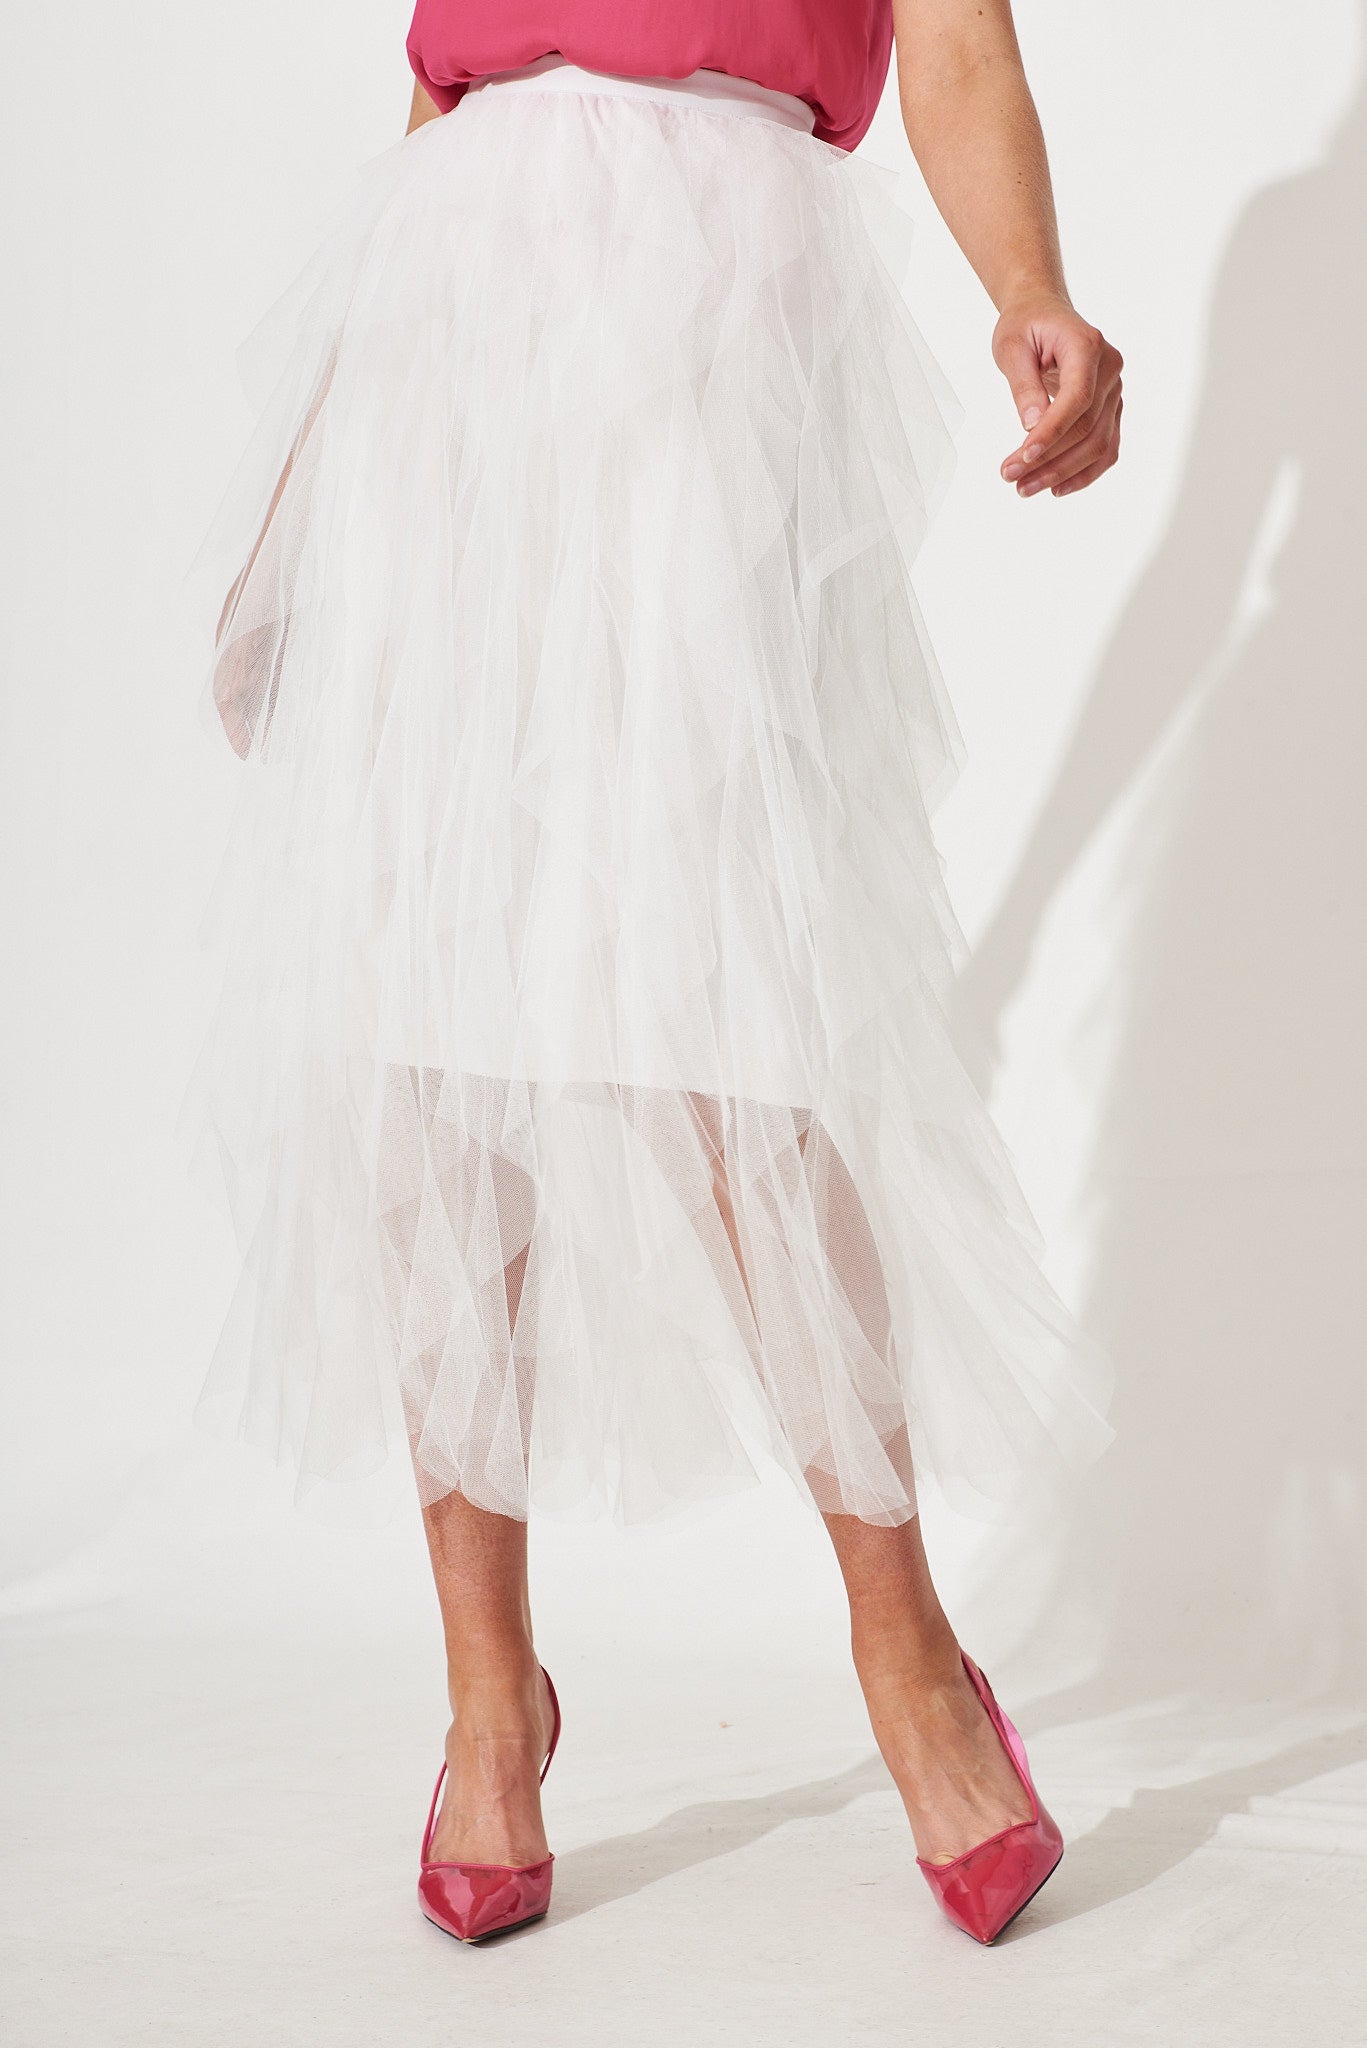 Cleef Midi Tulle Skirt In White - front